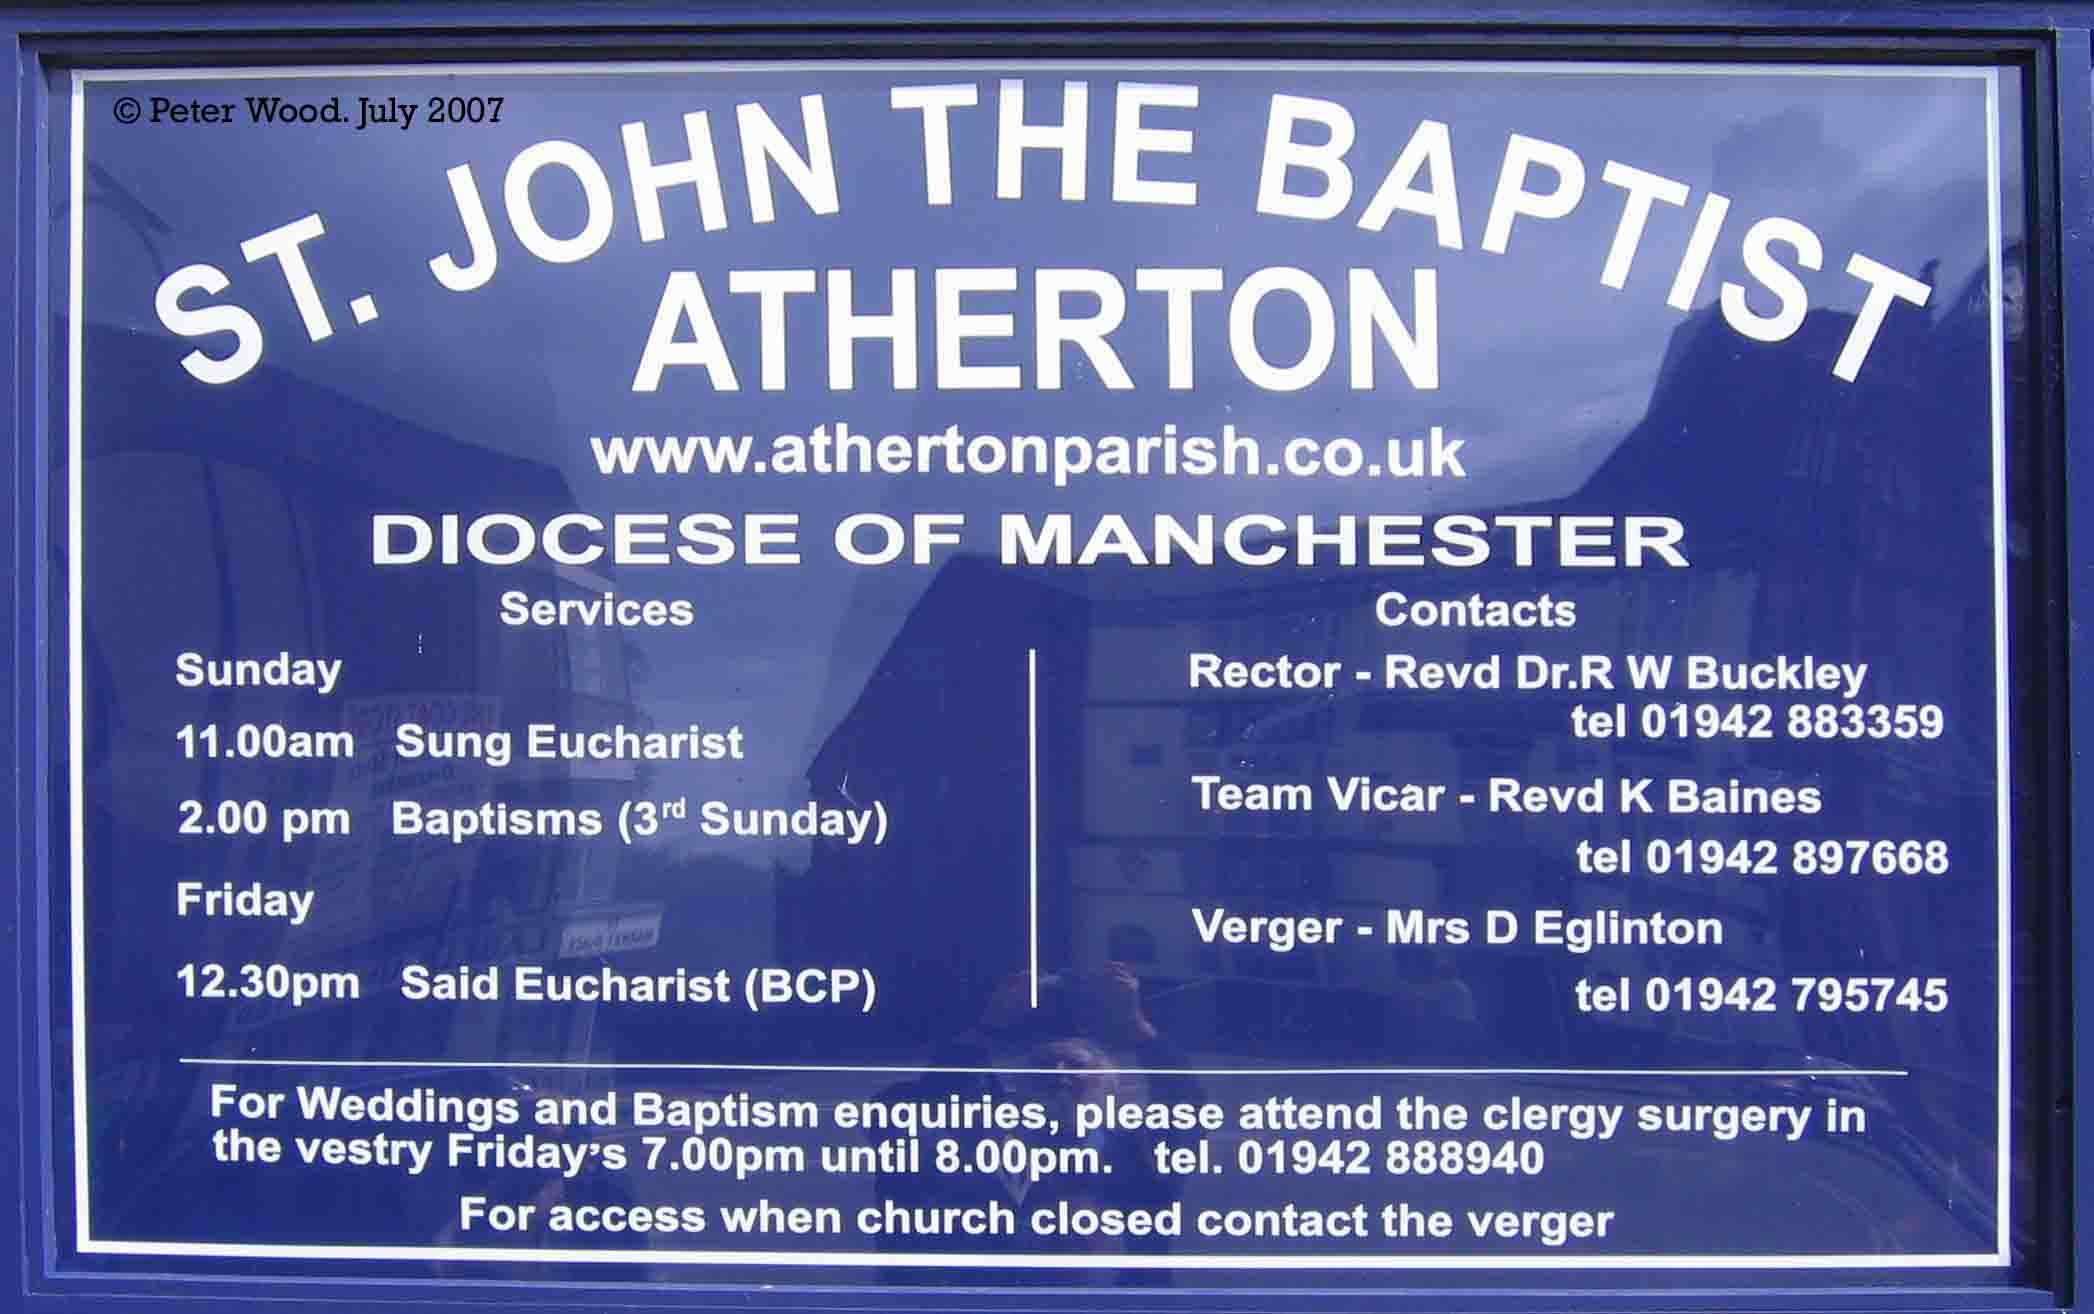 St John the Baptist signboard. Photo by Peter Wood
July 2007